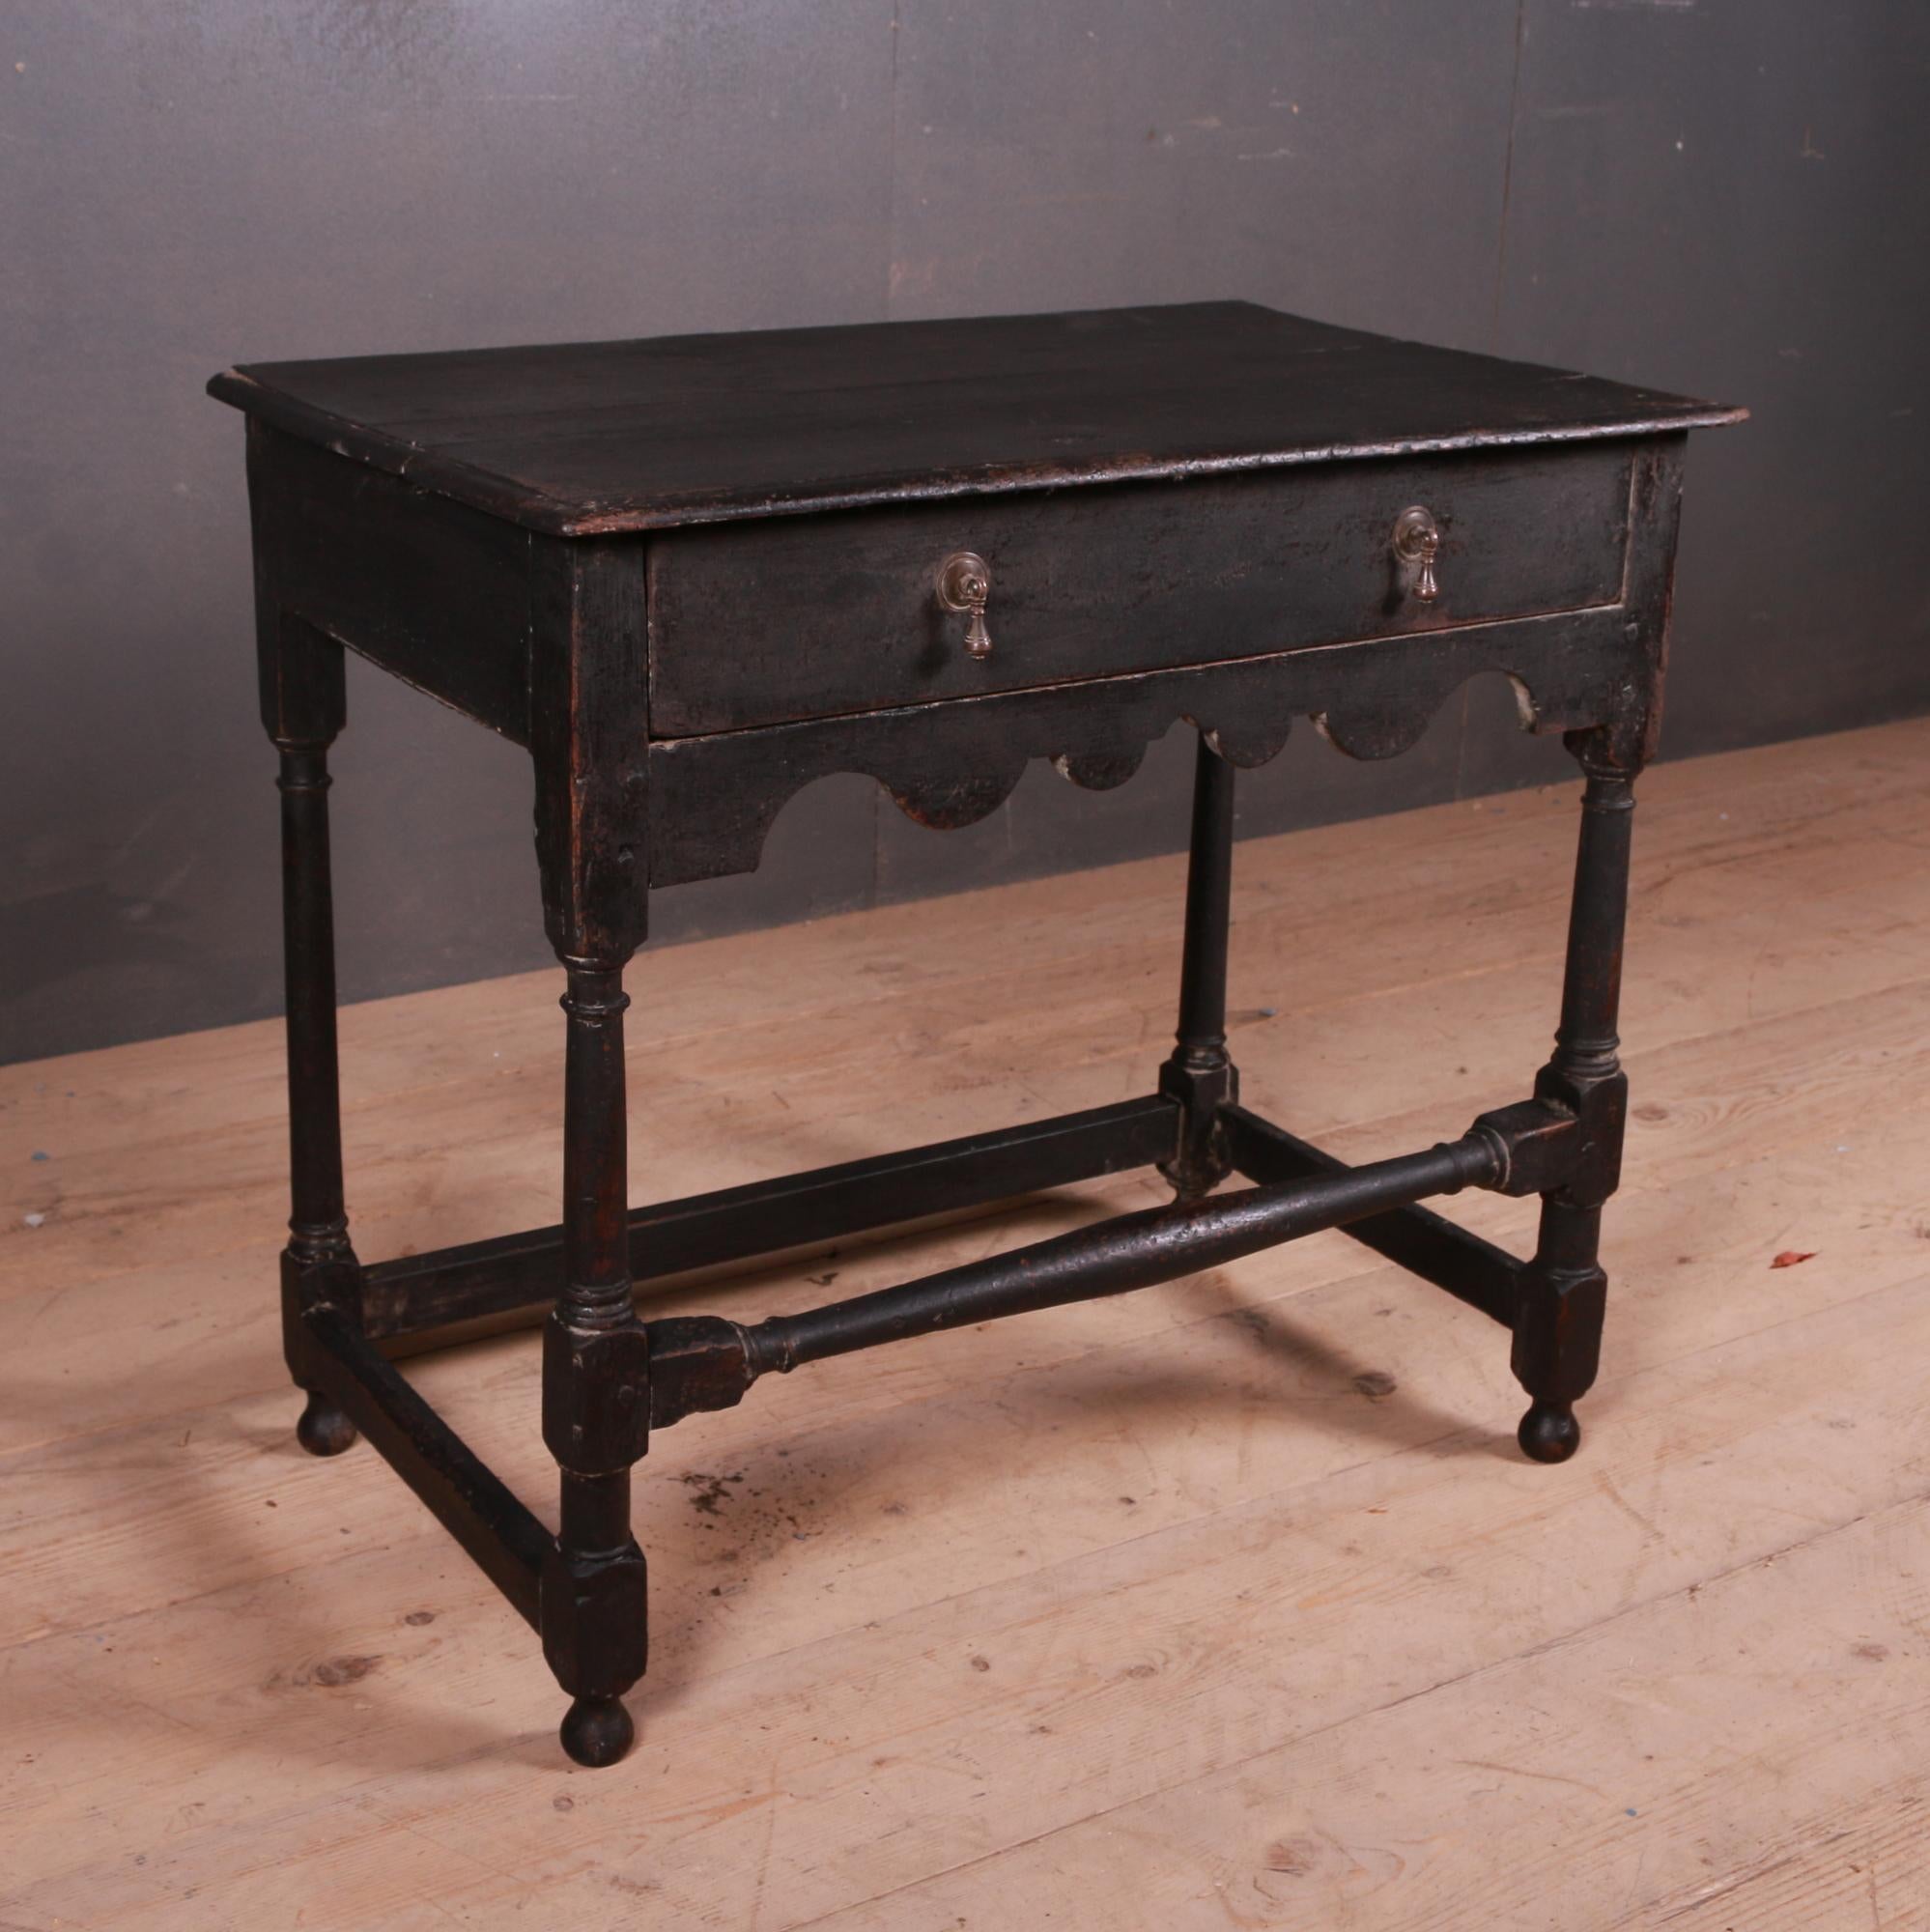 Very small 18th century English painted oak one drawer side table, 1760.

Dimensions
29 inches (74 cms) Wide
18 inches (46 cms) Deep
26 inches (66 cms) High